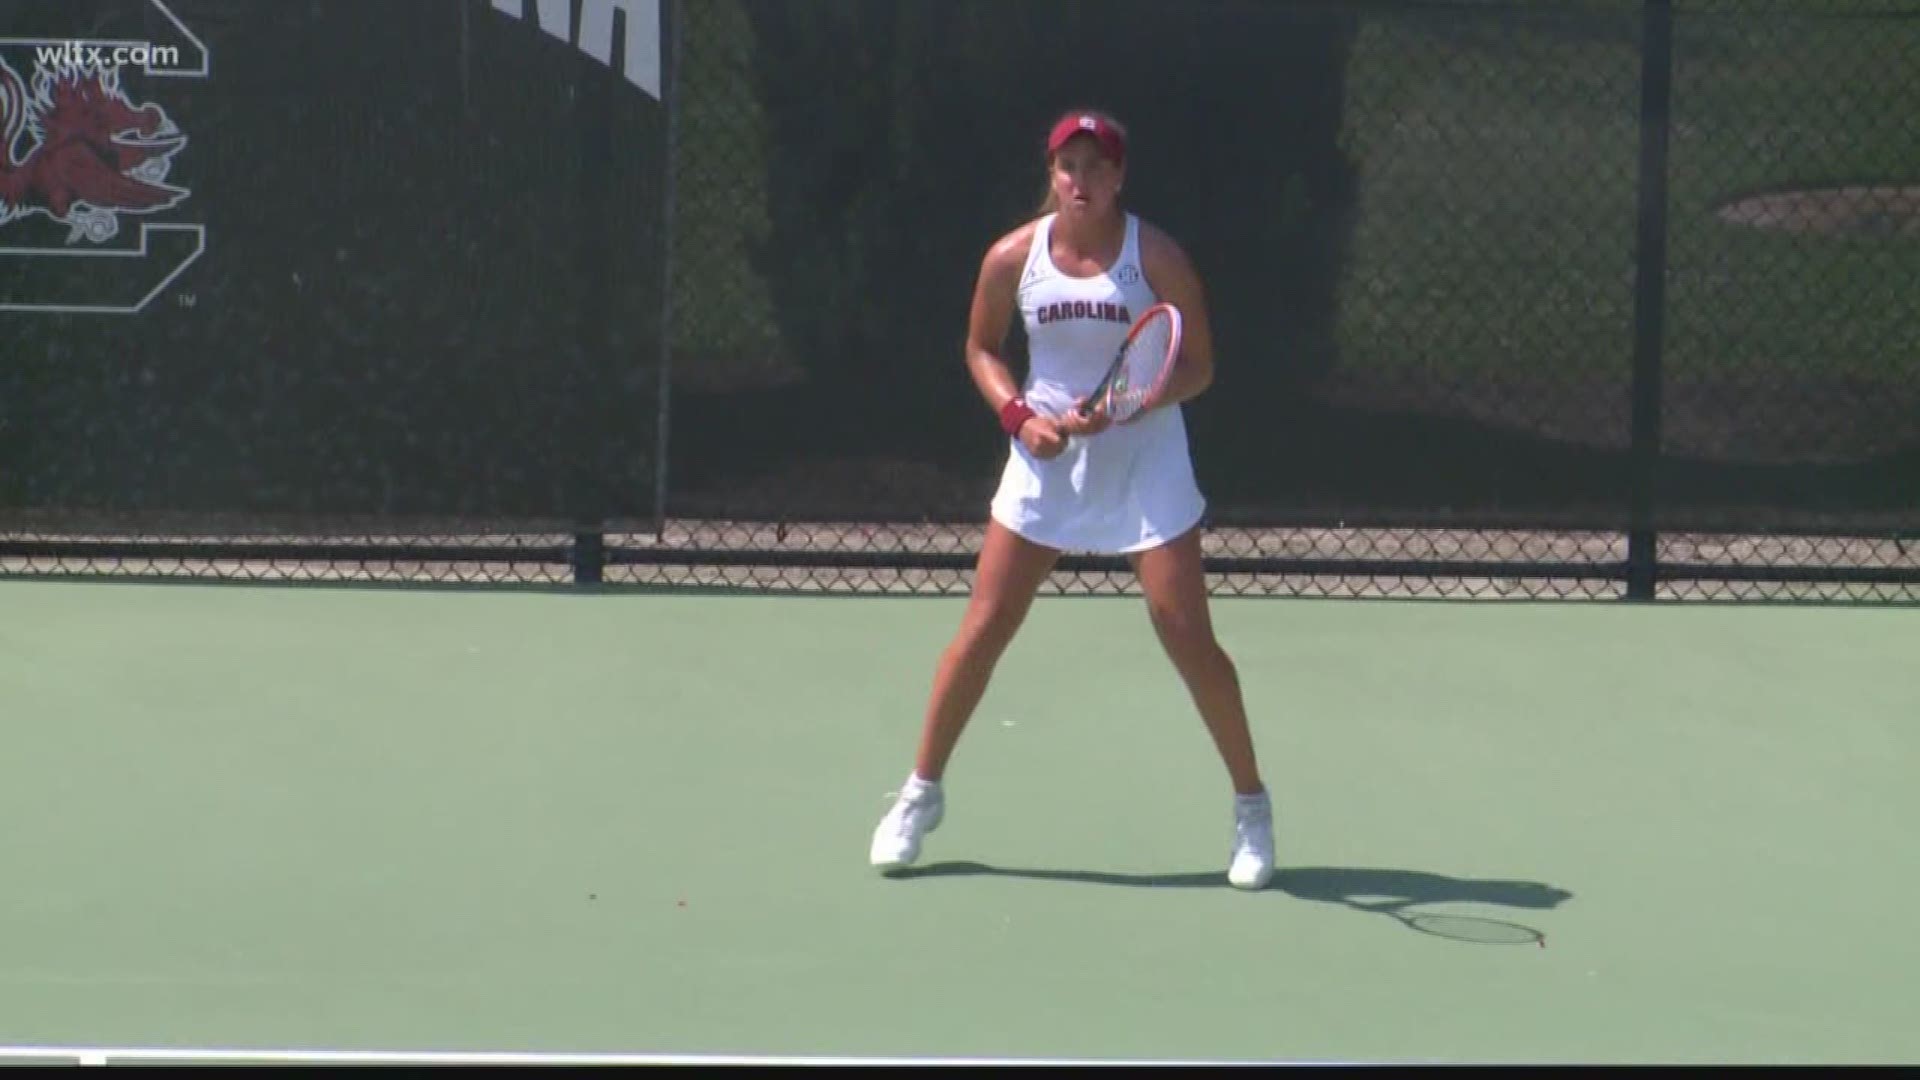 The USC women's tennis team cruised into the NCAA Round of 32 with a 4-0 win over Quinnipiac at the Carolina Tennis Center.